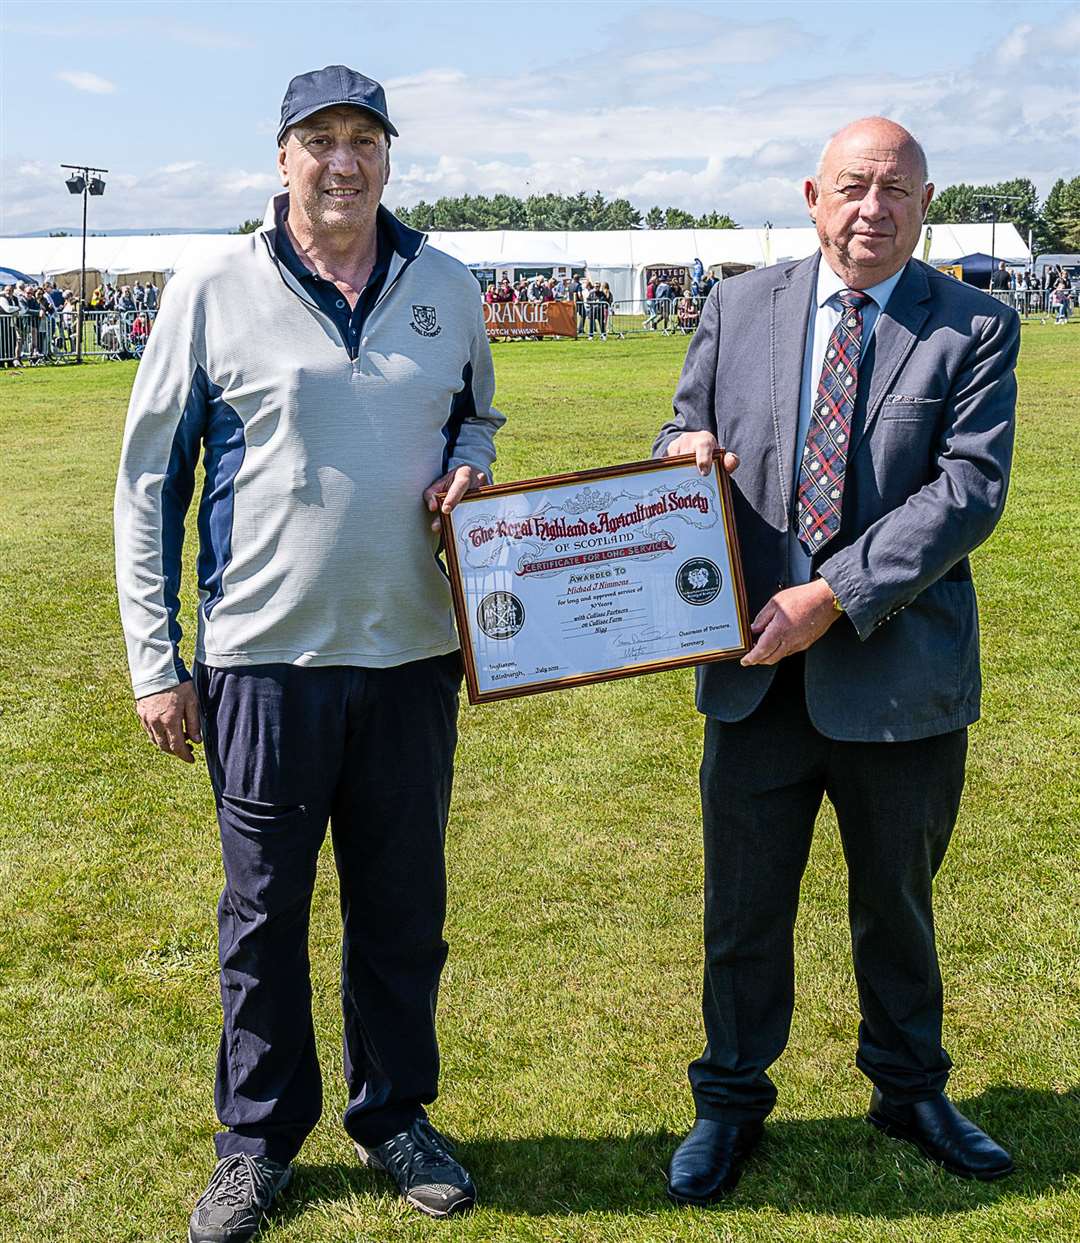 Special award to Michael Nimmons (left) for 31 years of service at Cullisse Farm, Nigg presented by Dennis Bridgeford, director Royal Highland & Agricultural Society. Photo: East Sutherland Camera Club